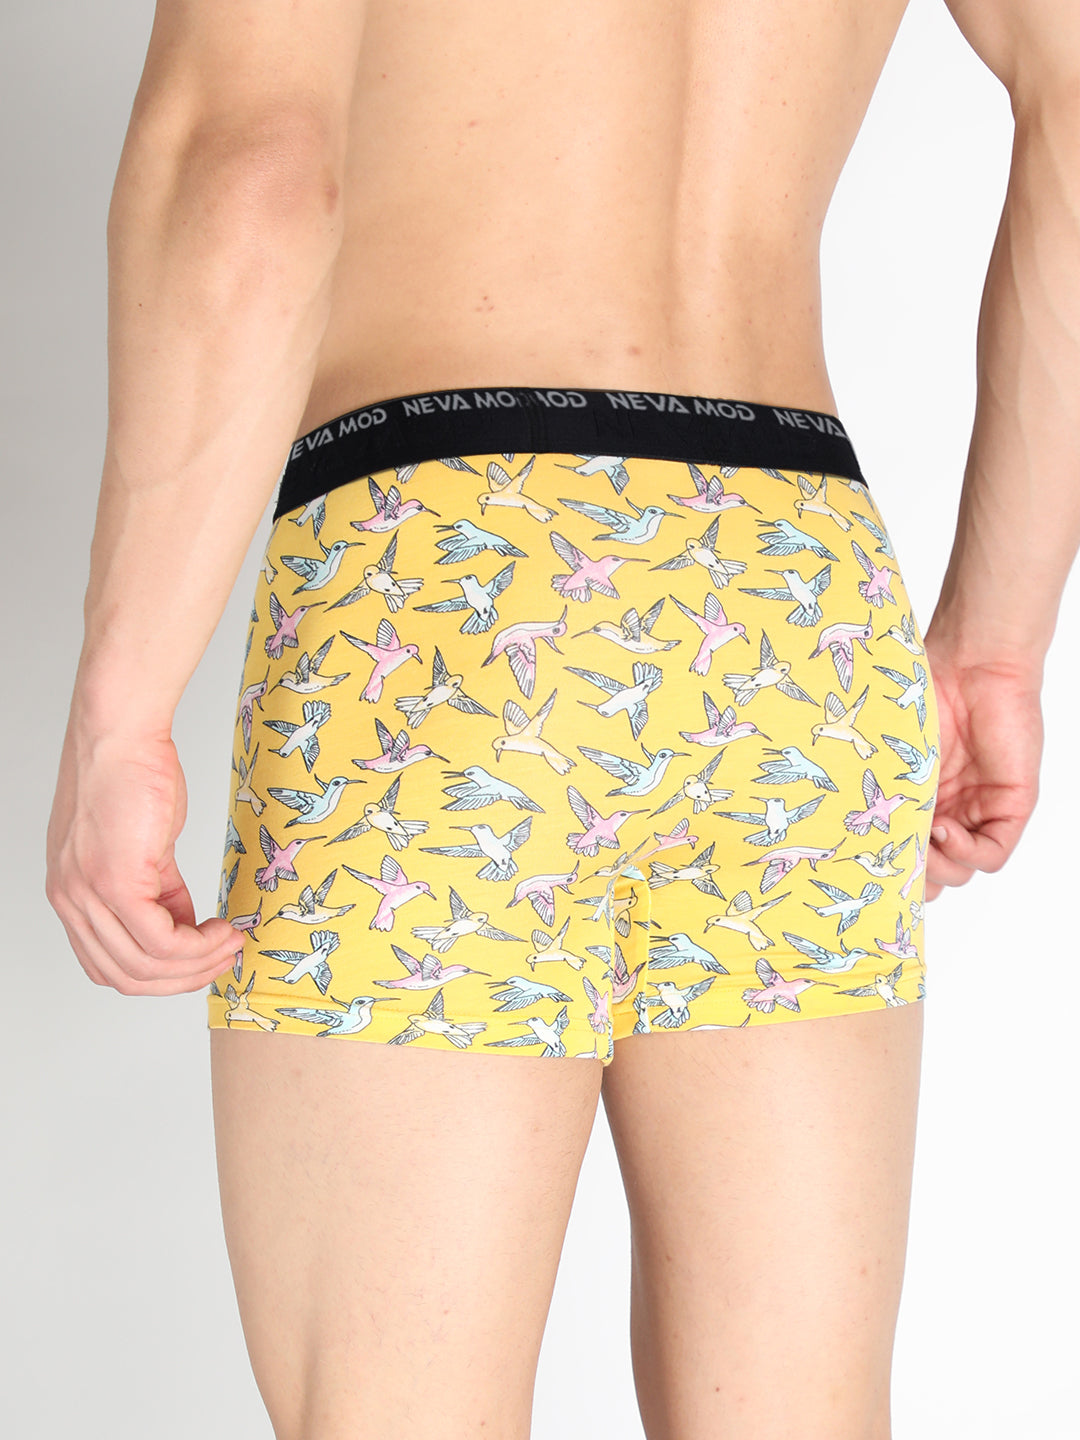 Neva Modal Printed Short Trunk for Men - Grey,blue, Yellow Collection (Pack of 3)